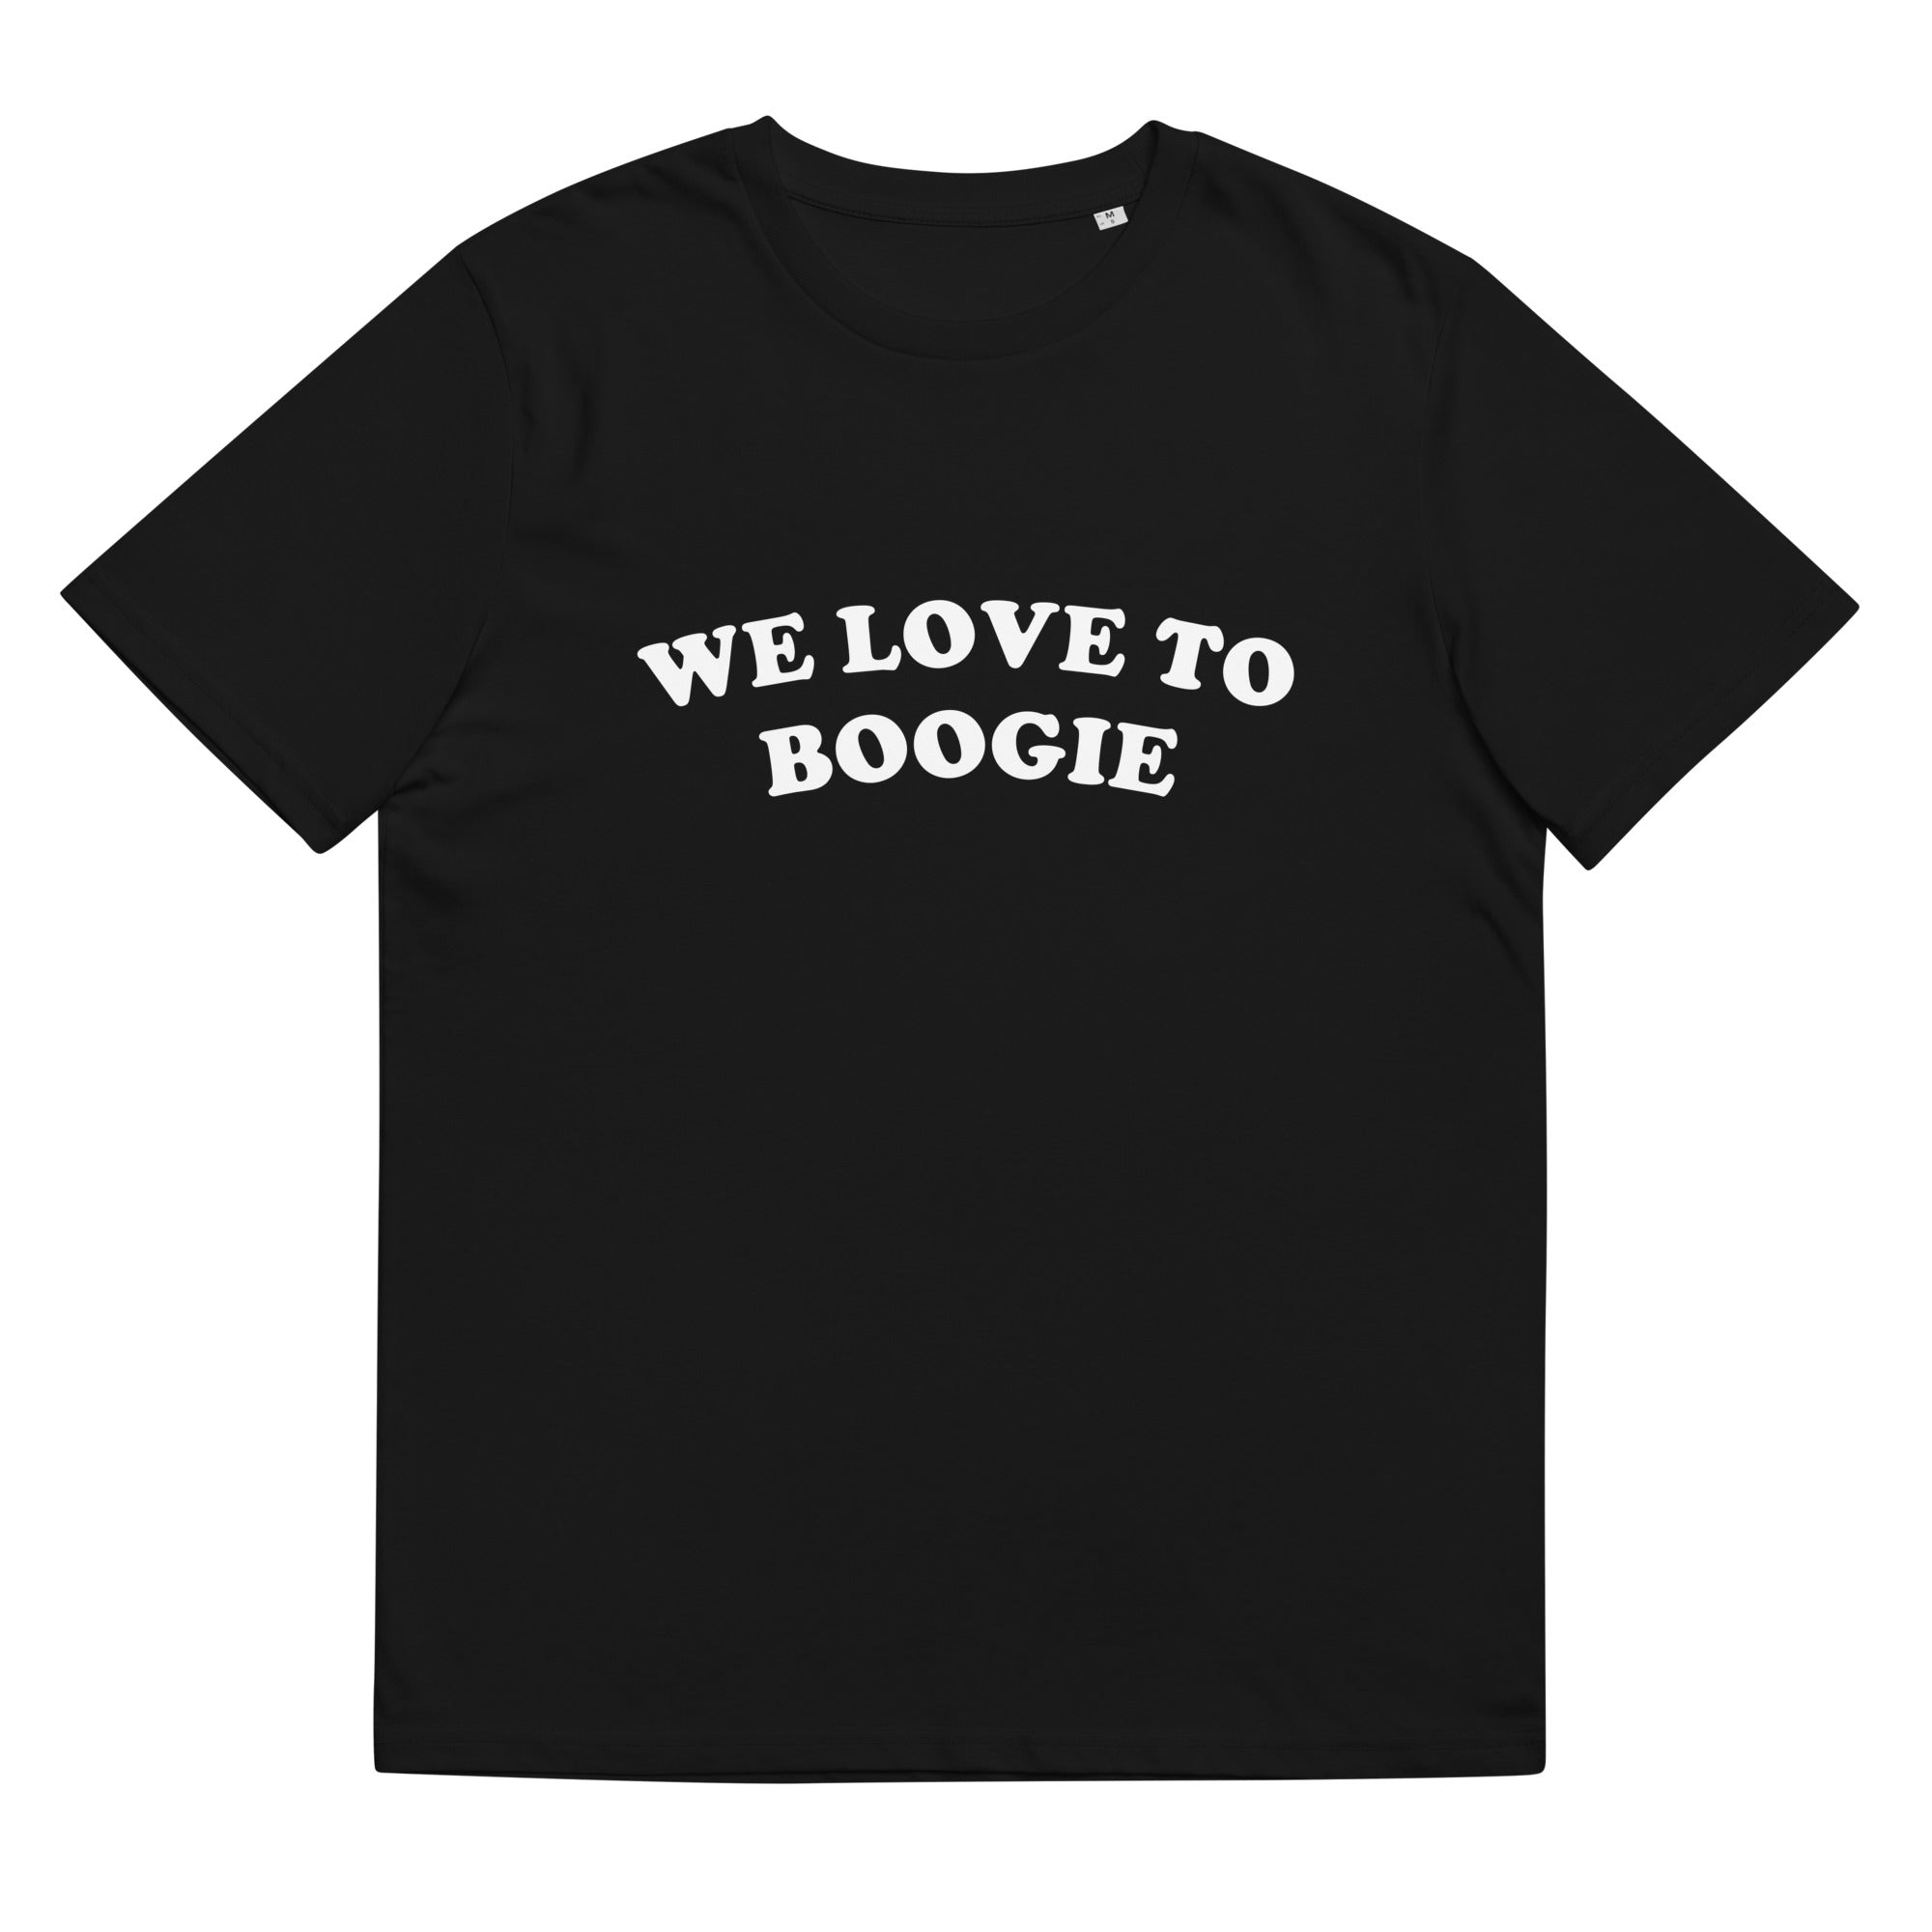 WE LOVE TO BOOGIE Printed Unisex Organic Cotton T-shirt